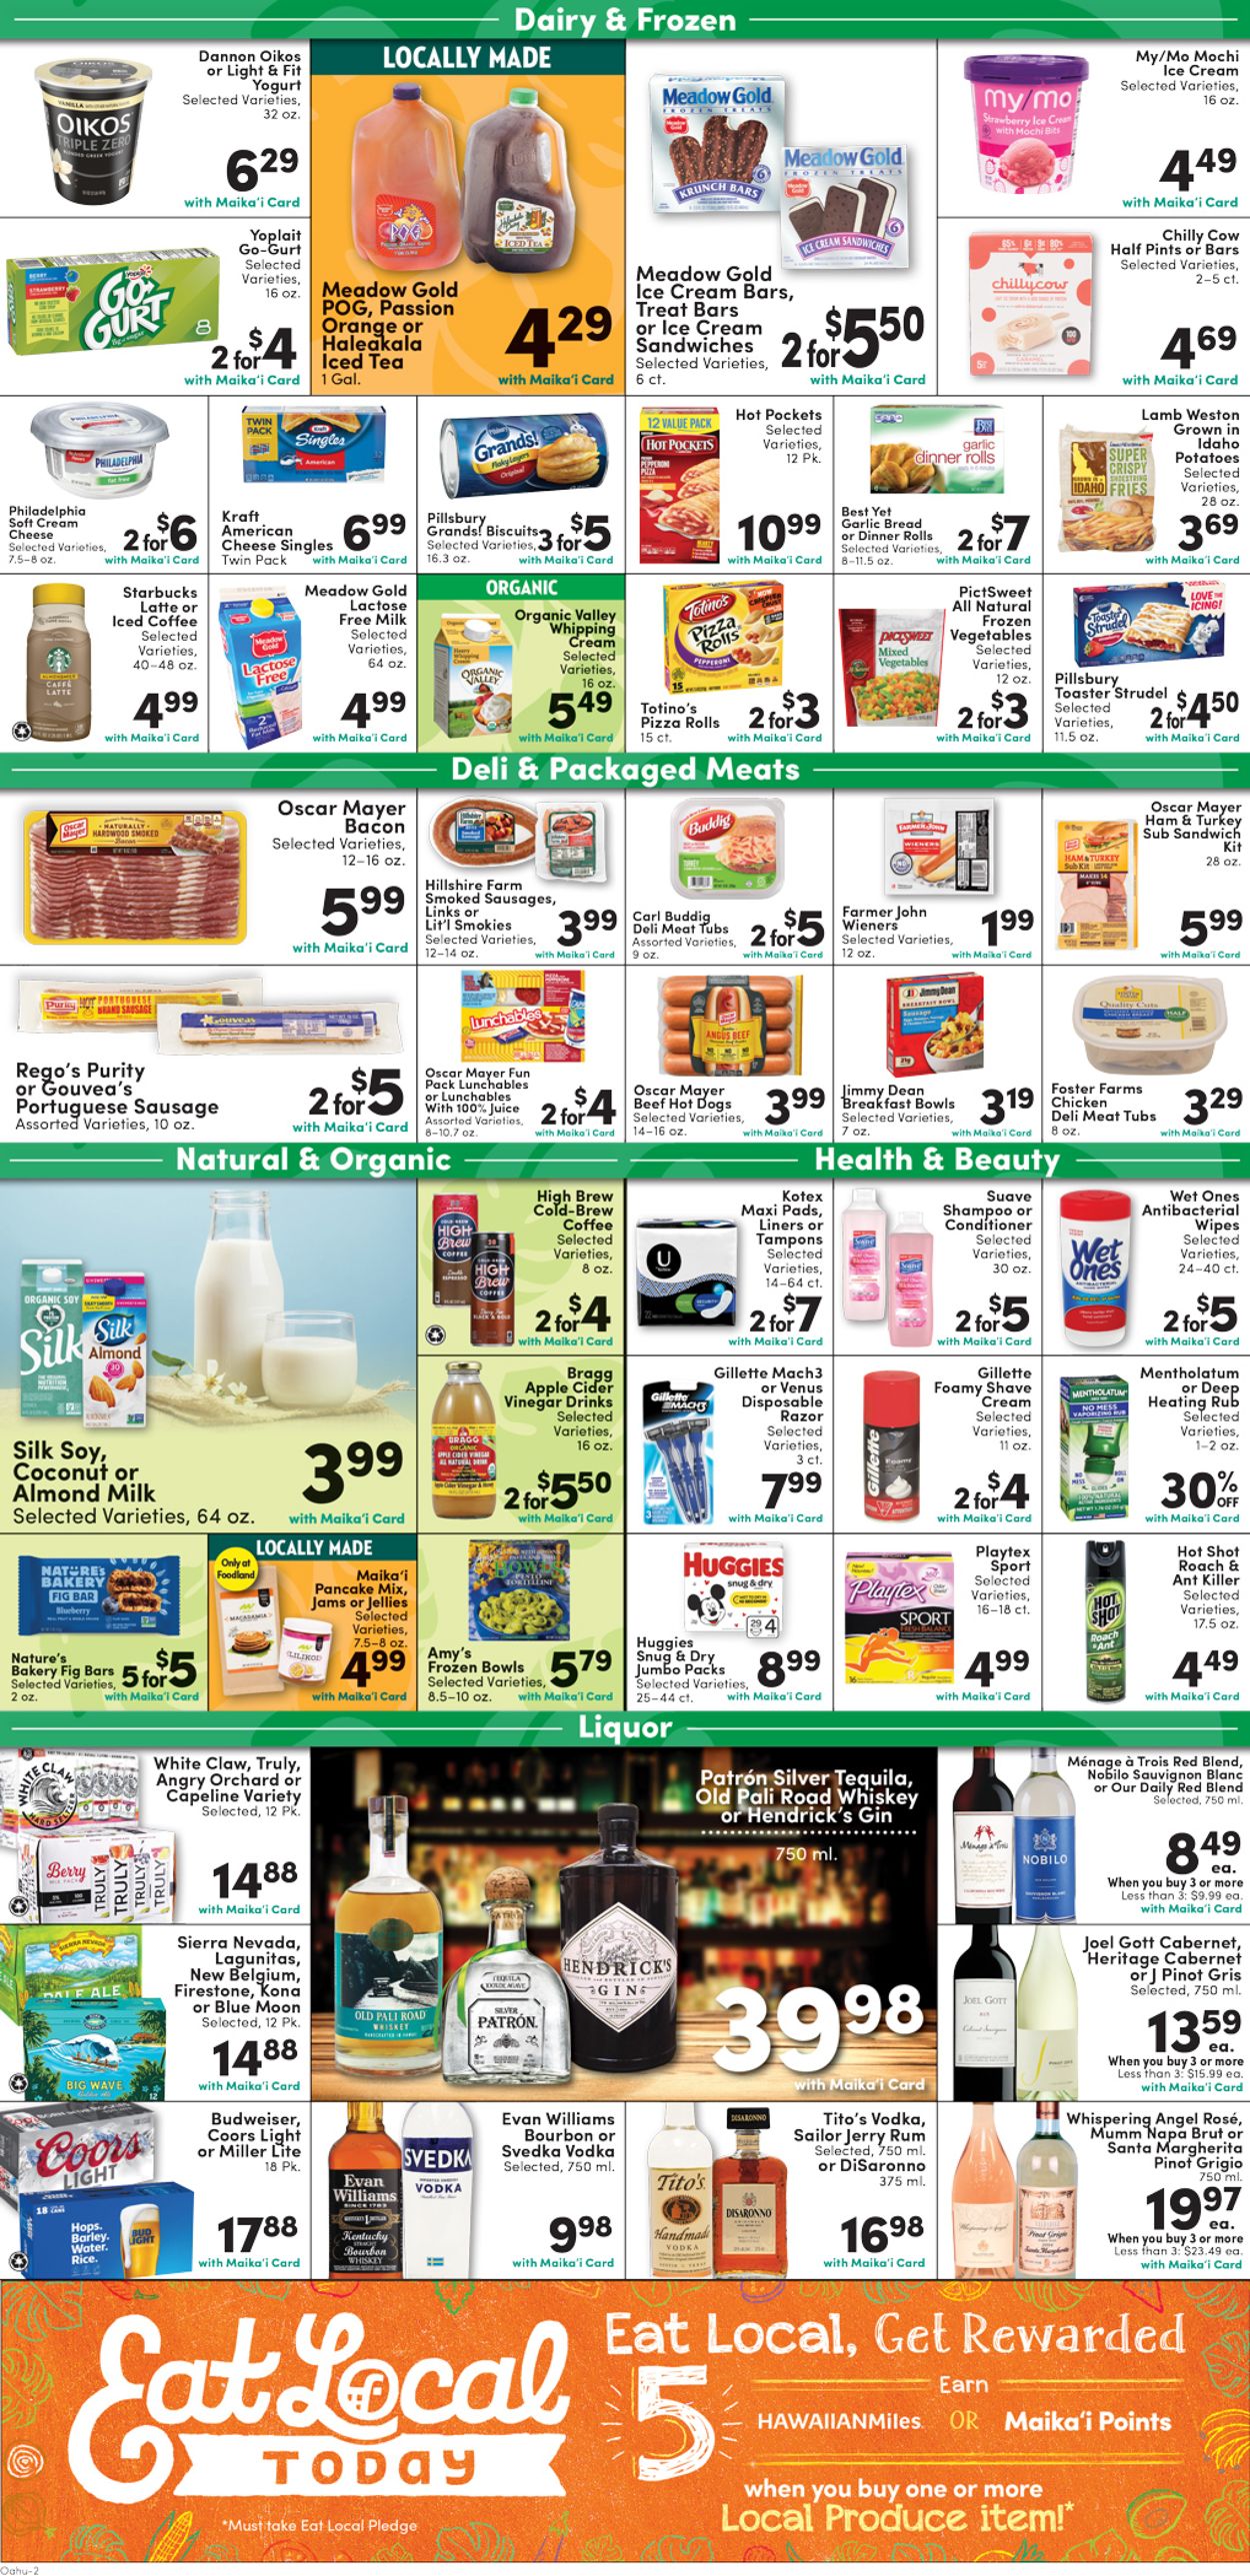 Catalogue Foodland from 01/08/2020